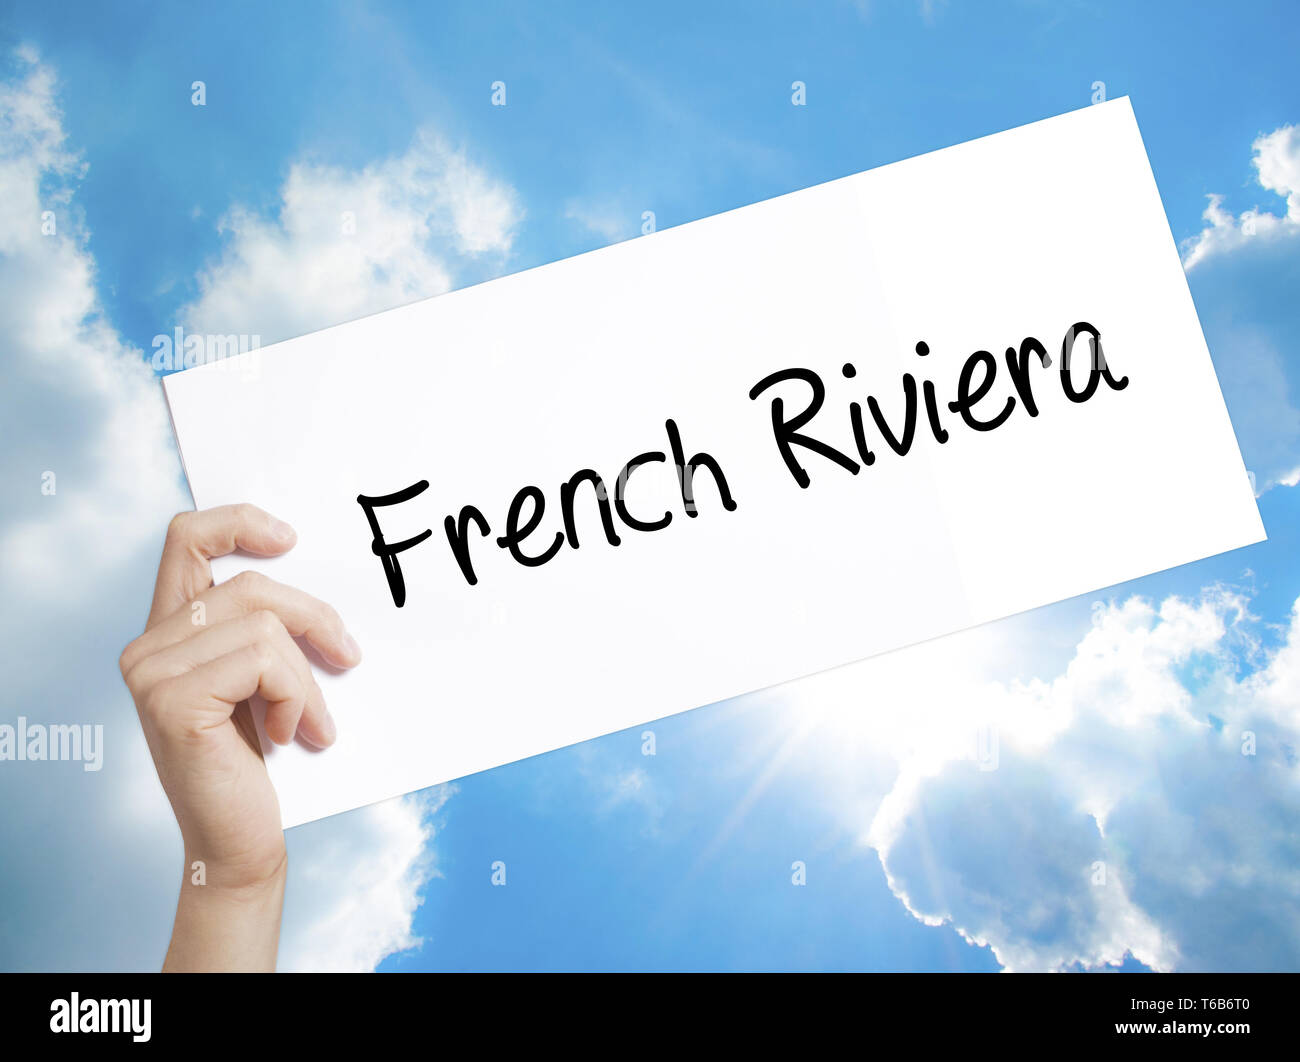 French Riviera Sign on white paper. Man Hand Holding Paper with text. Isolated on sky background Stock Photo